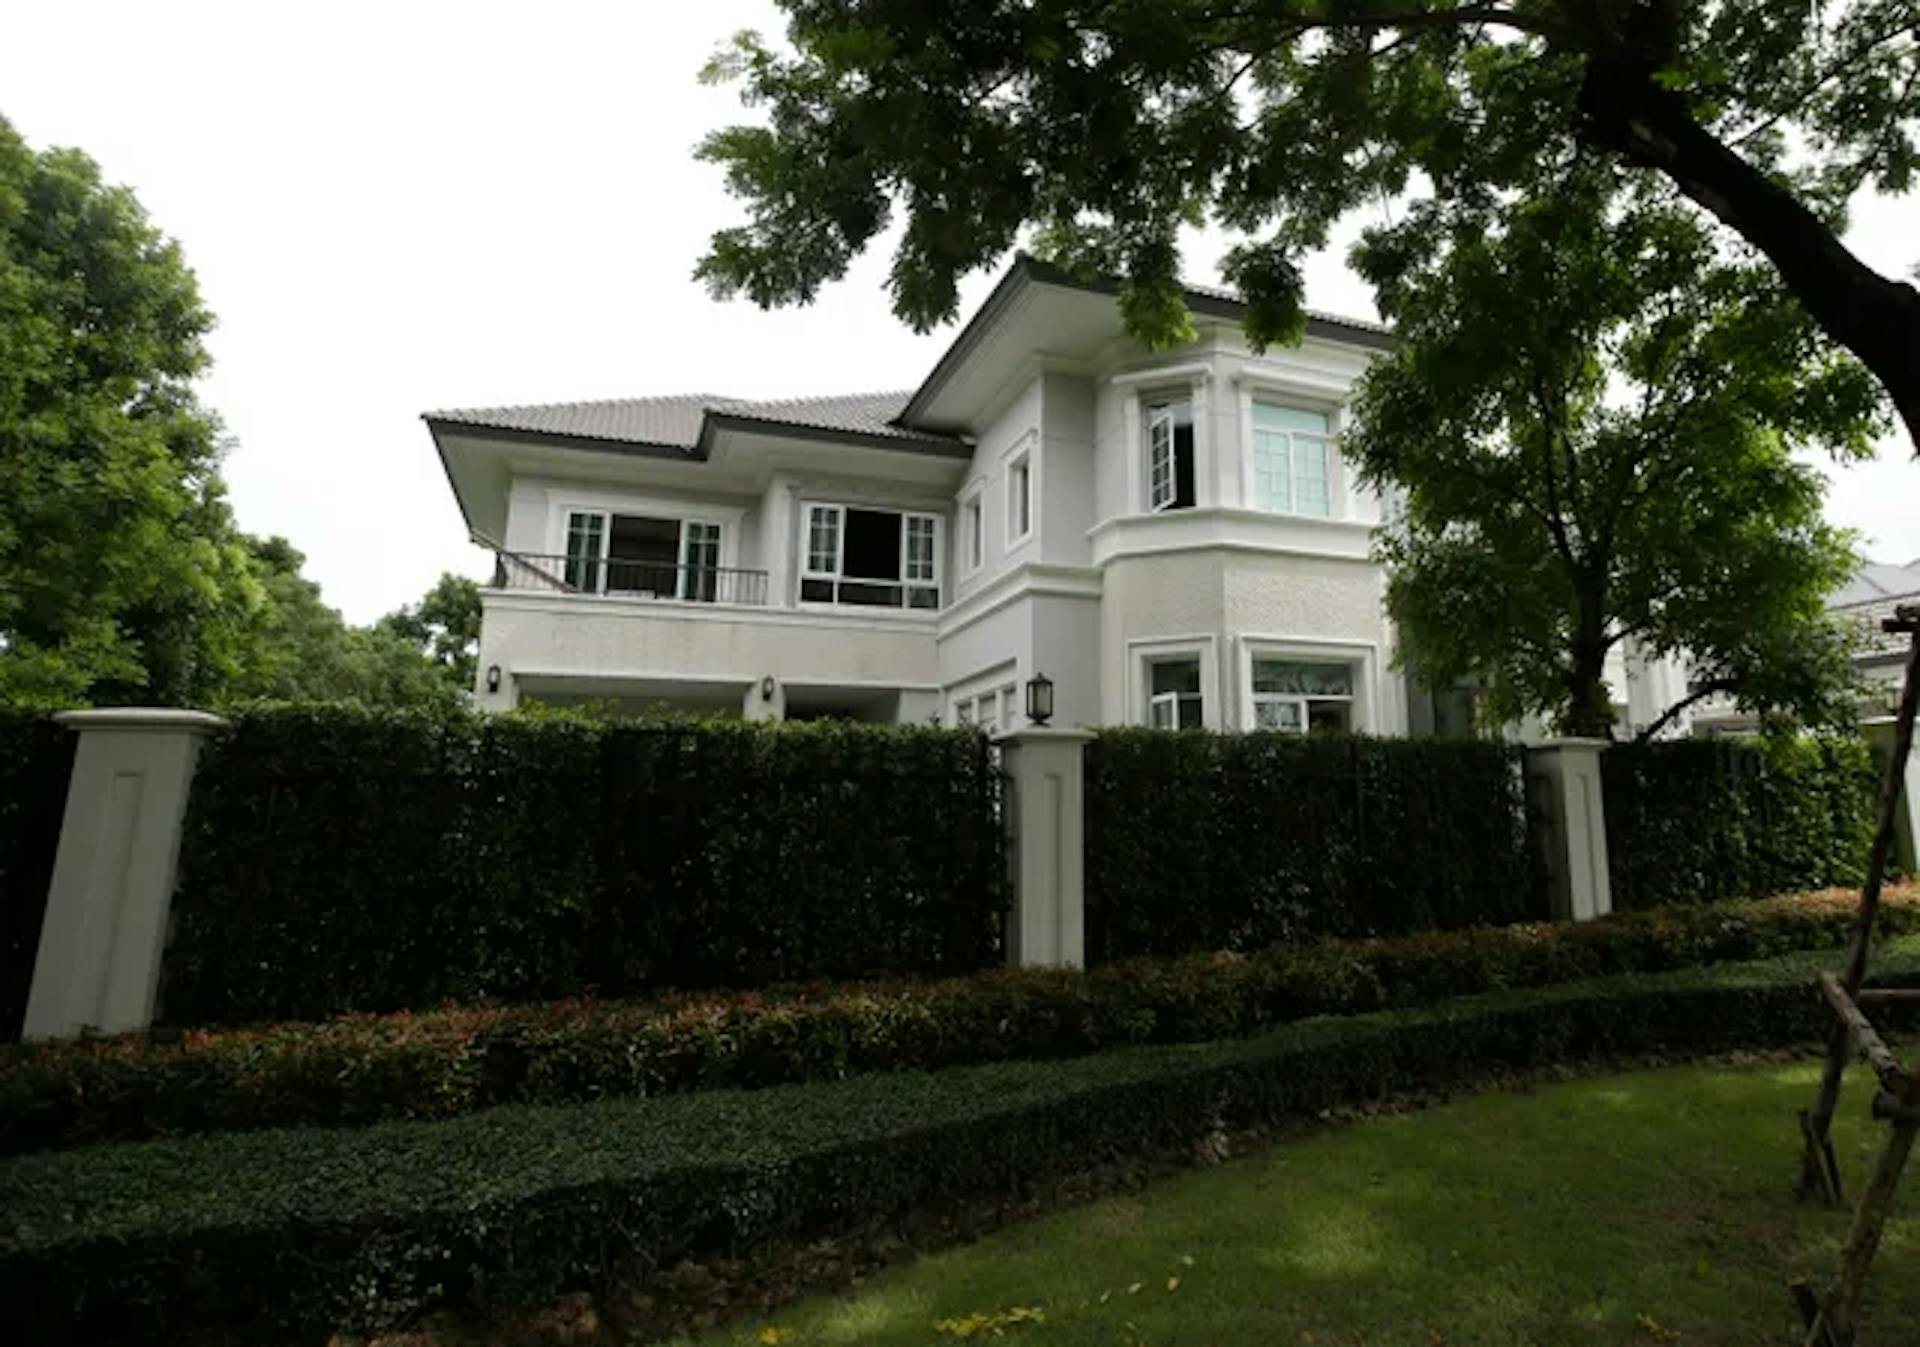  One of the properties of Alexandre Cazes is seen in Bangkok, Thailand